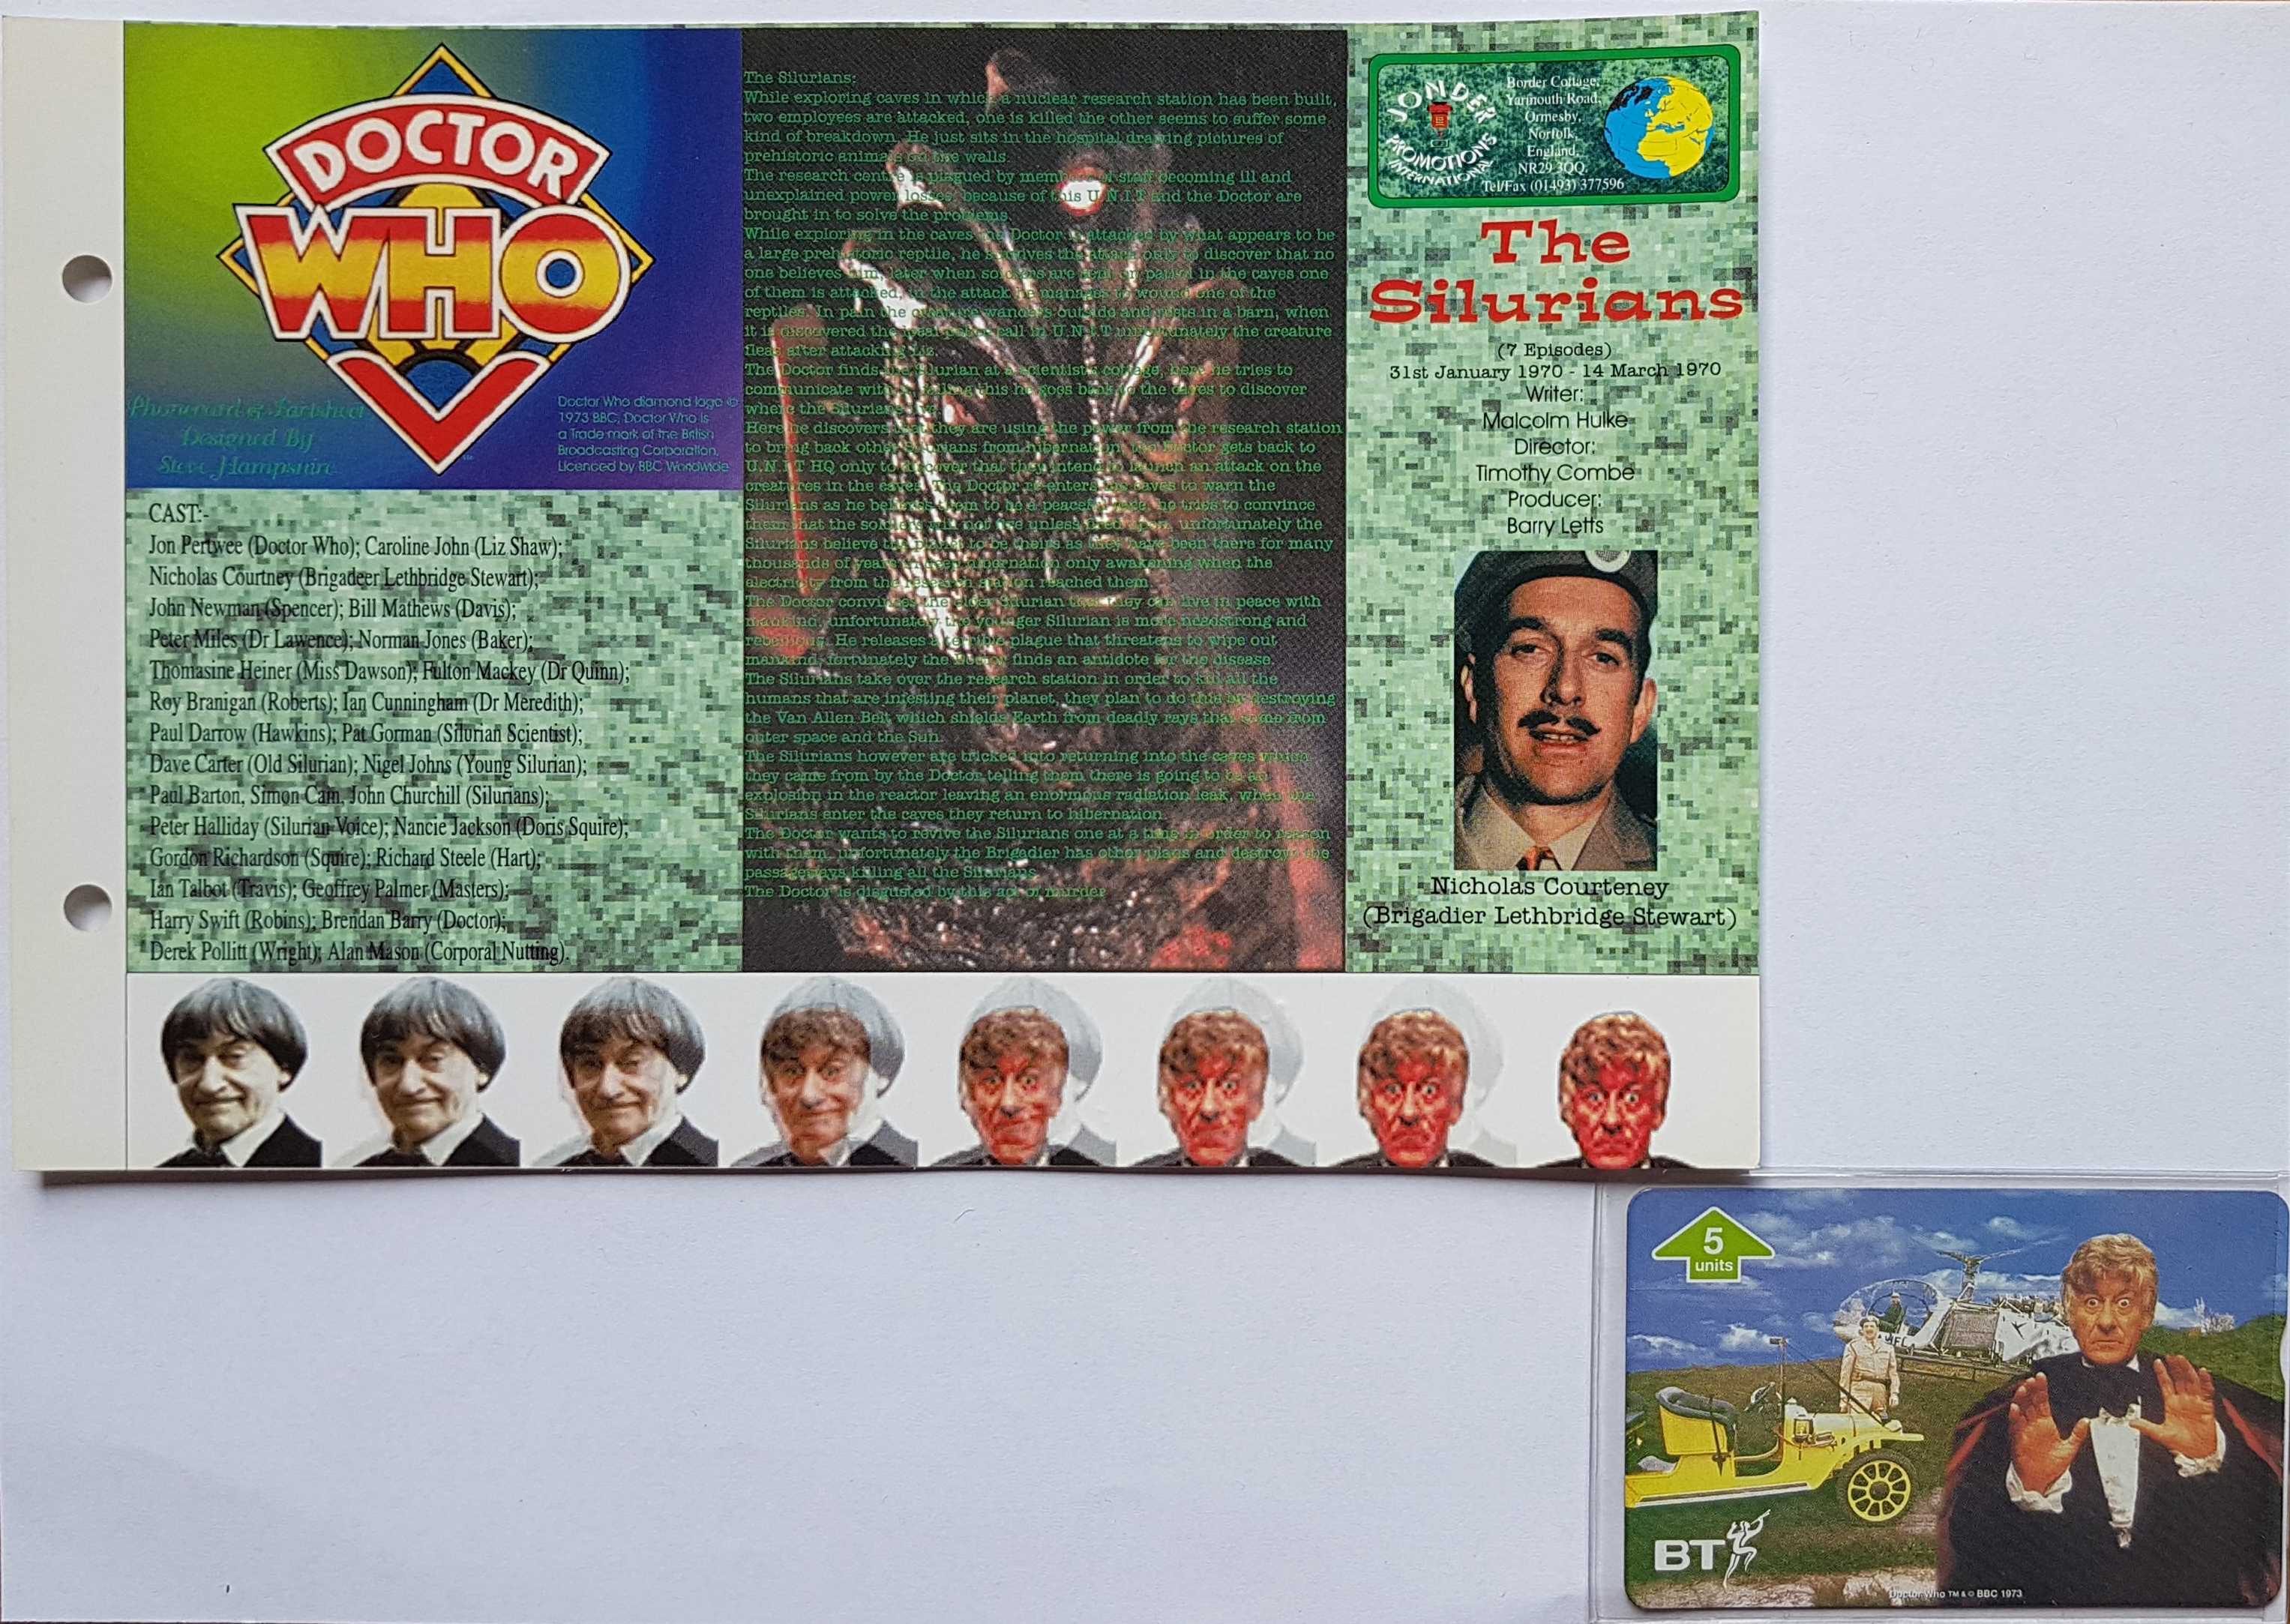 Picture of PC-BTG627 Doctor Who - The Silurians - Phone card by artist  from the BBC records and Tapes library